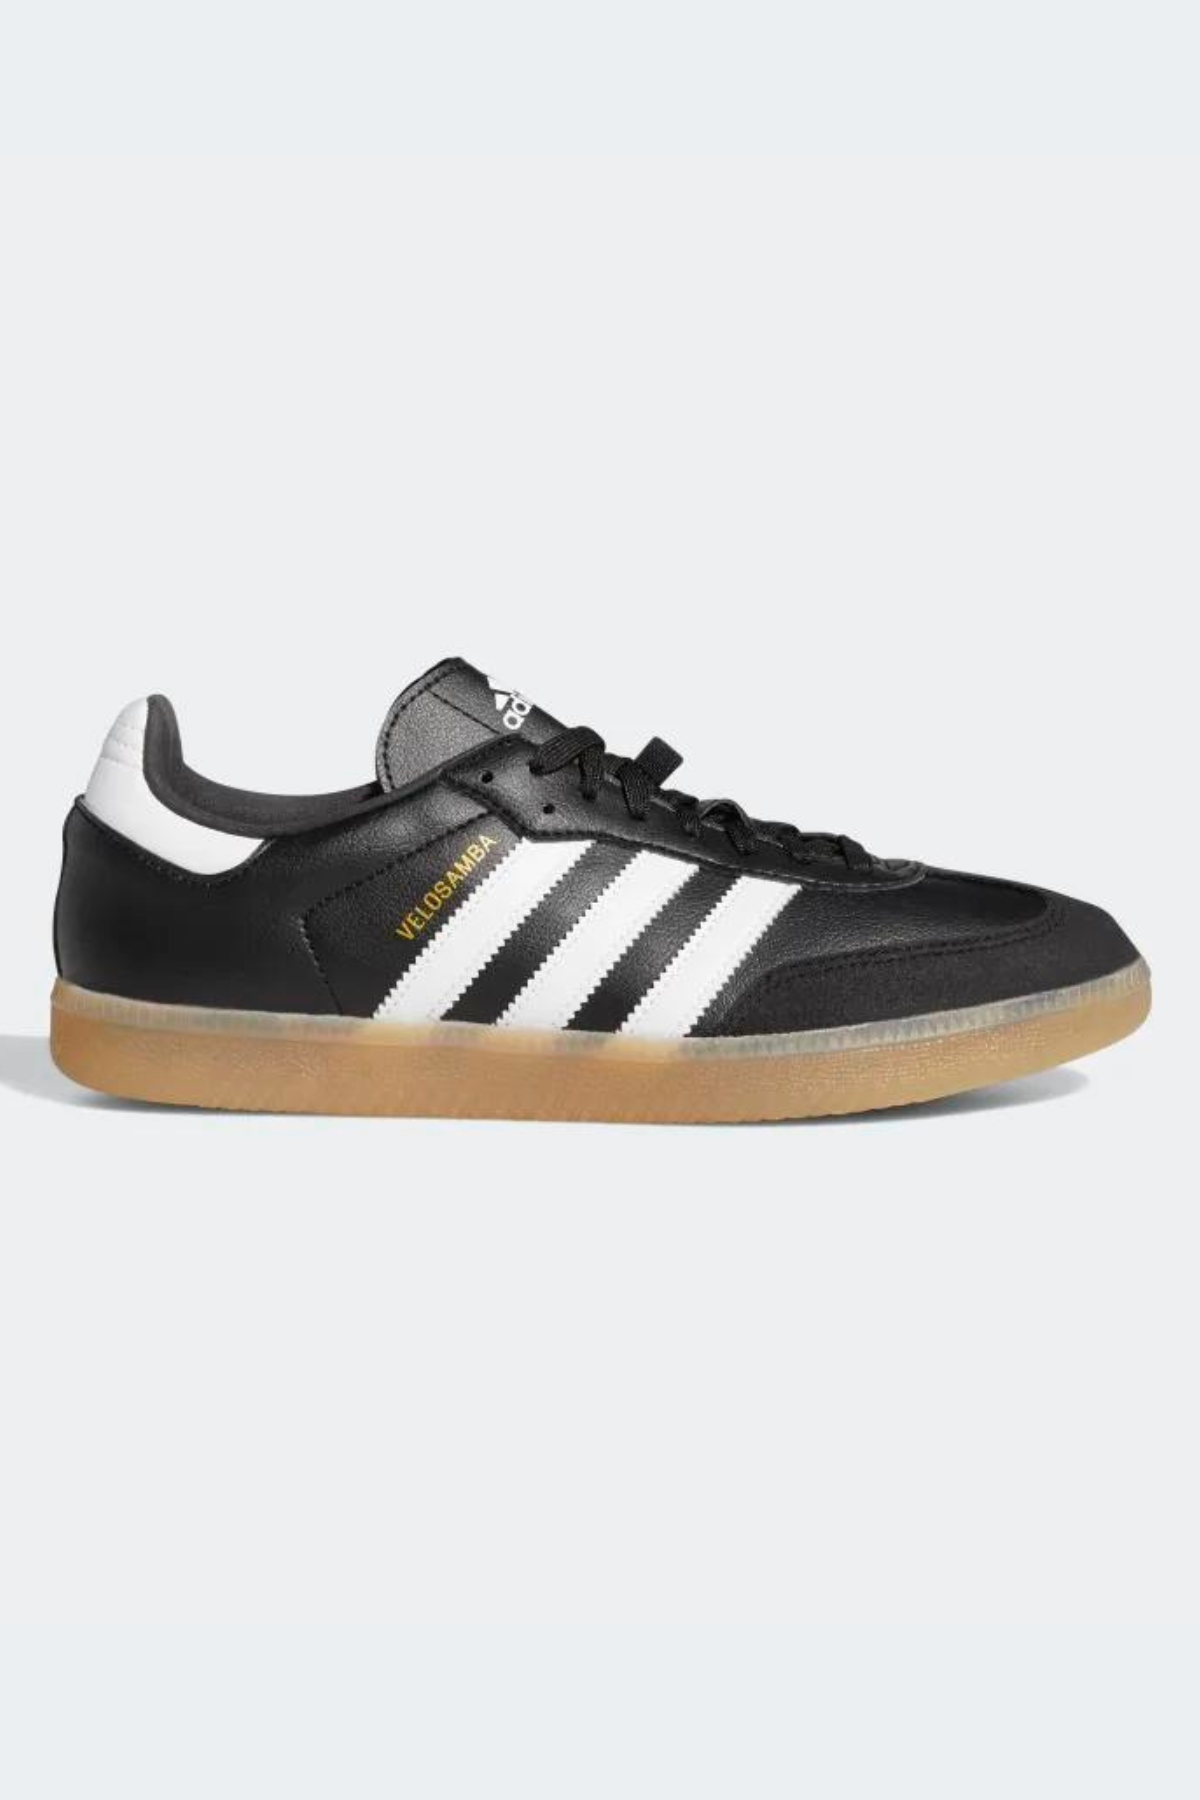 The Adidas Samba Sneaker Is Summer 2022's Most In-Demand Shoe | Marie ...